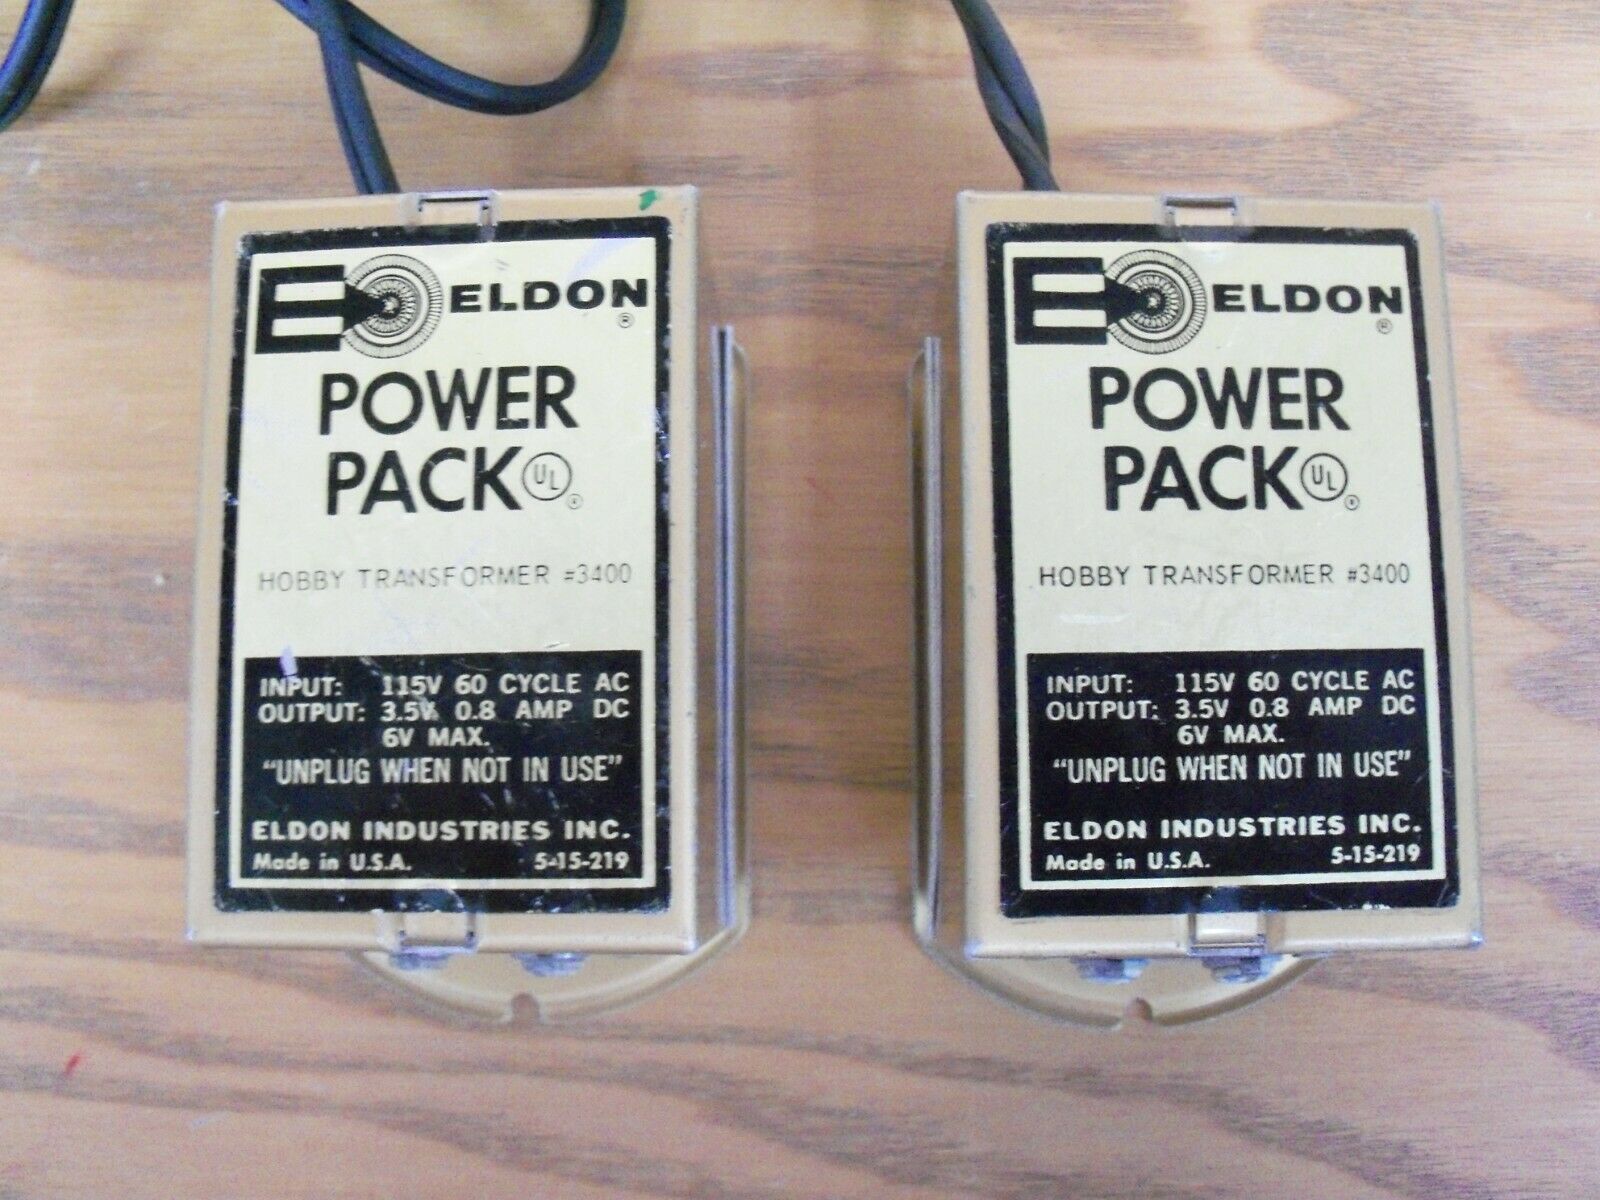 (2) Eldon Power Pack Toy Transformers #3400 6 Volt Dc Tested @ 6.5 Volts Dc